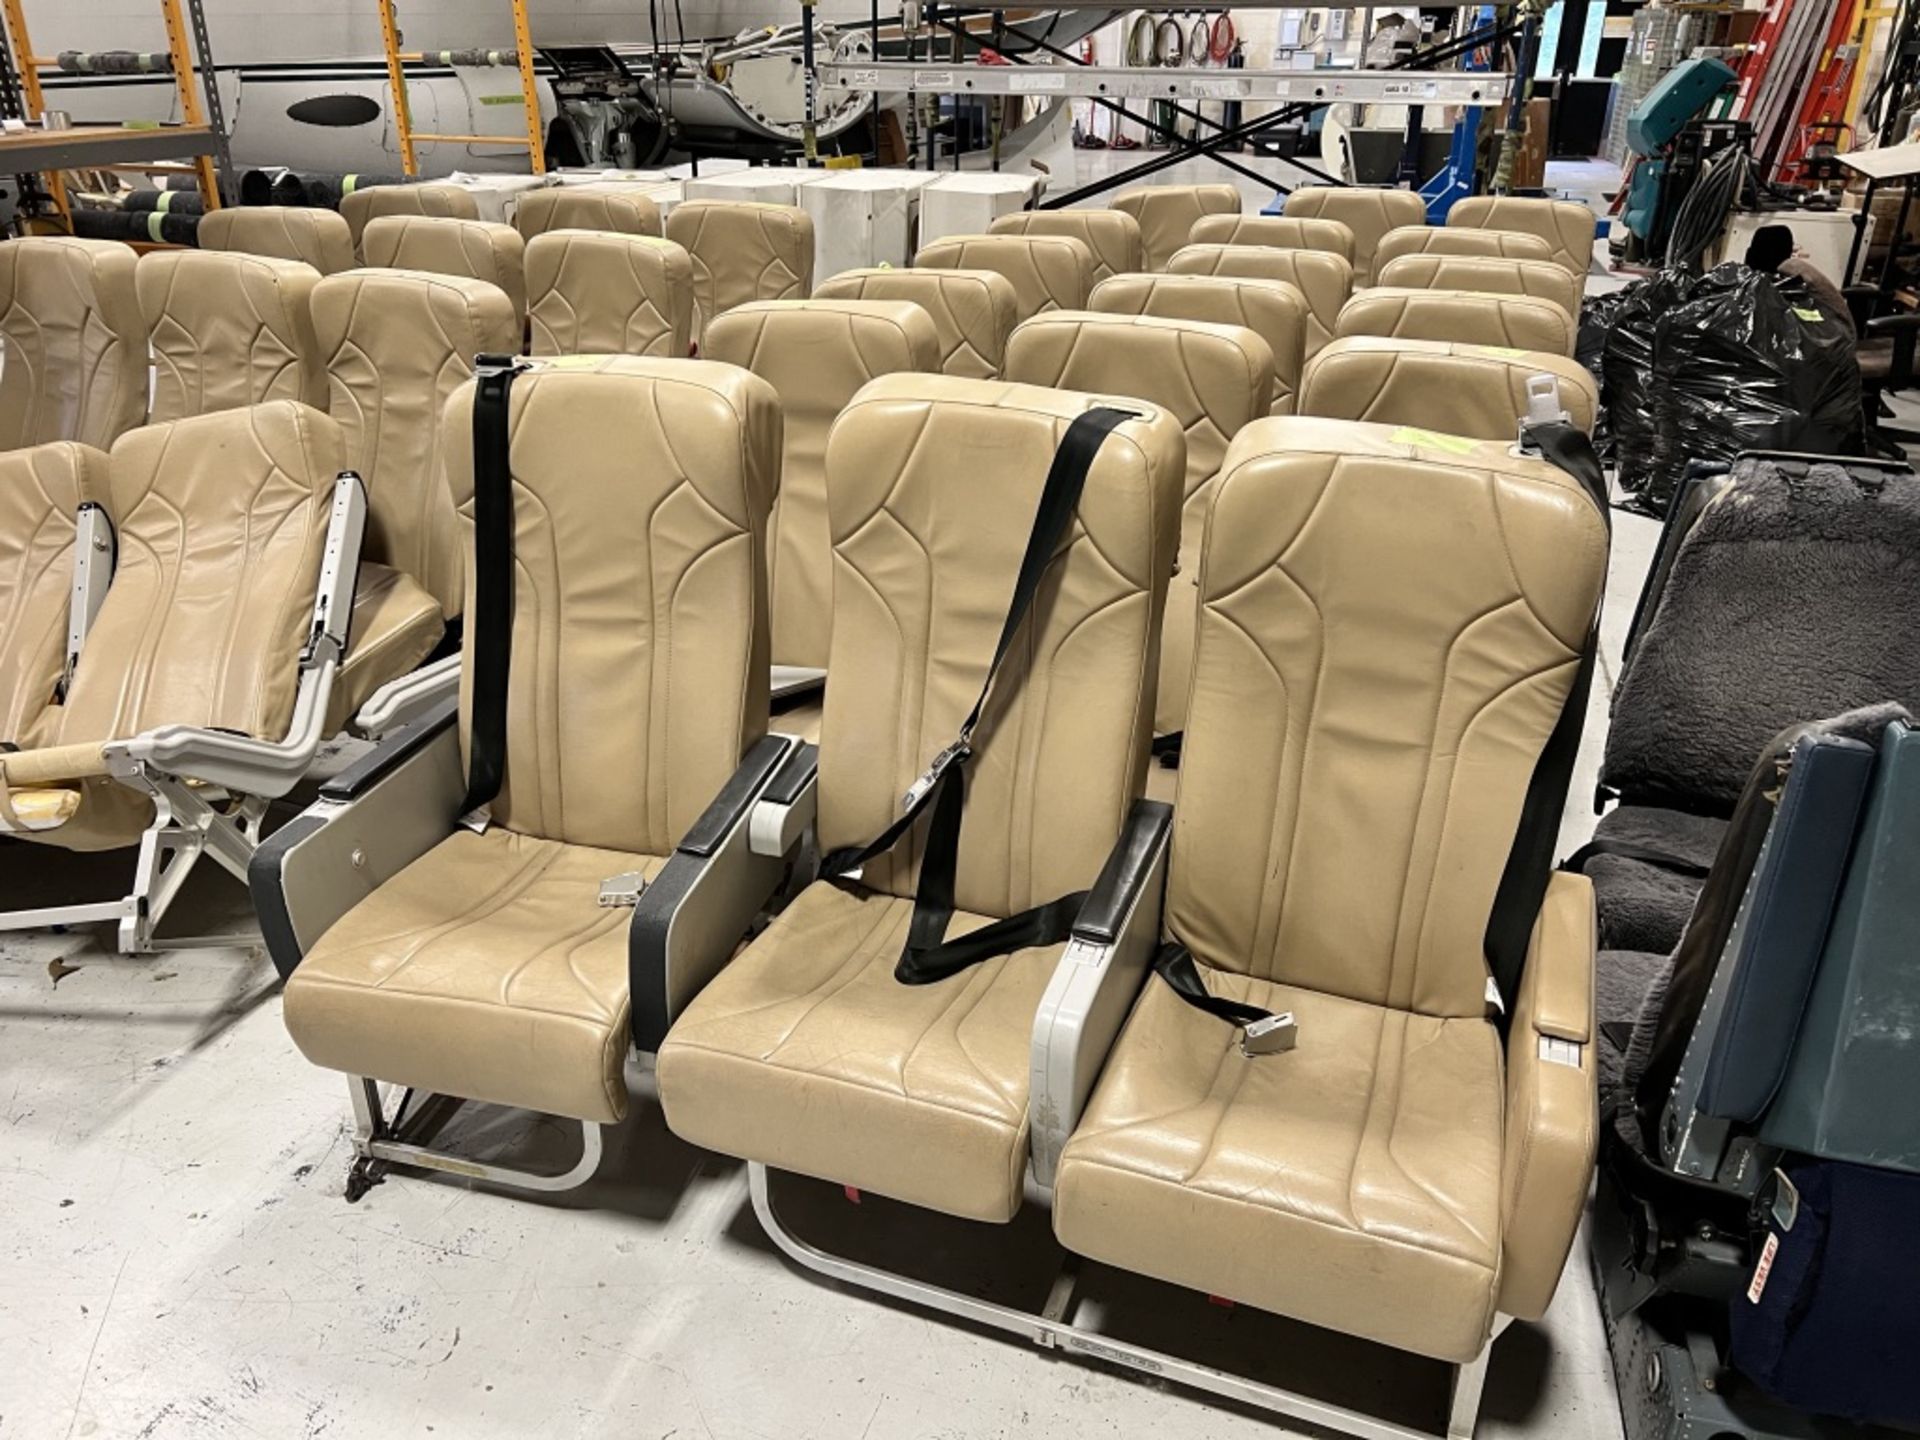 LOT OF: (30) SEATS, (1) FLIGHT ATTENDANT SEAT/ JUMP SEAT, (7) OVERHEAD LUGGAGE COMPARTMENTS AND (1)